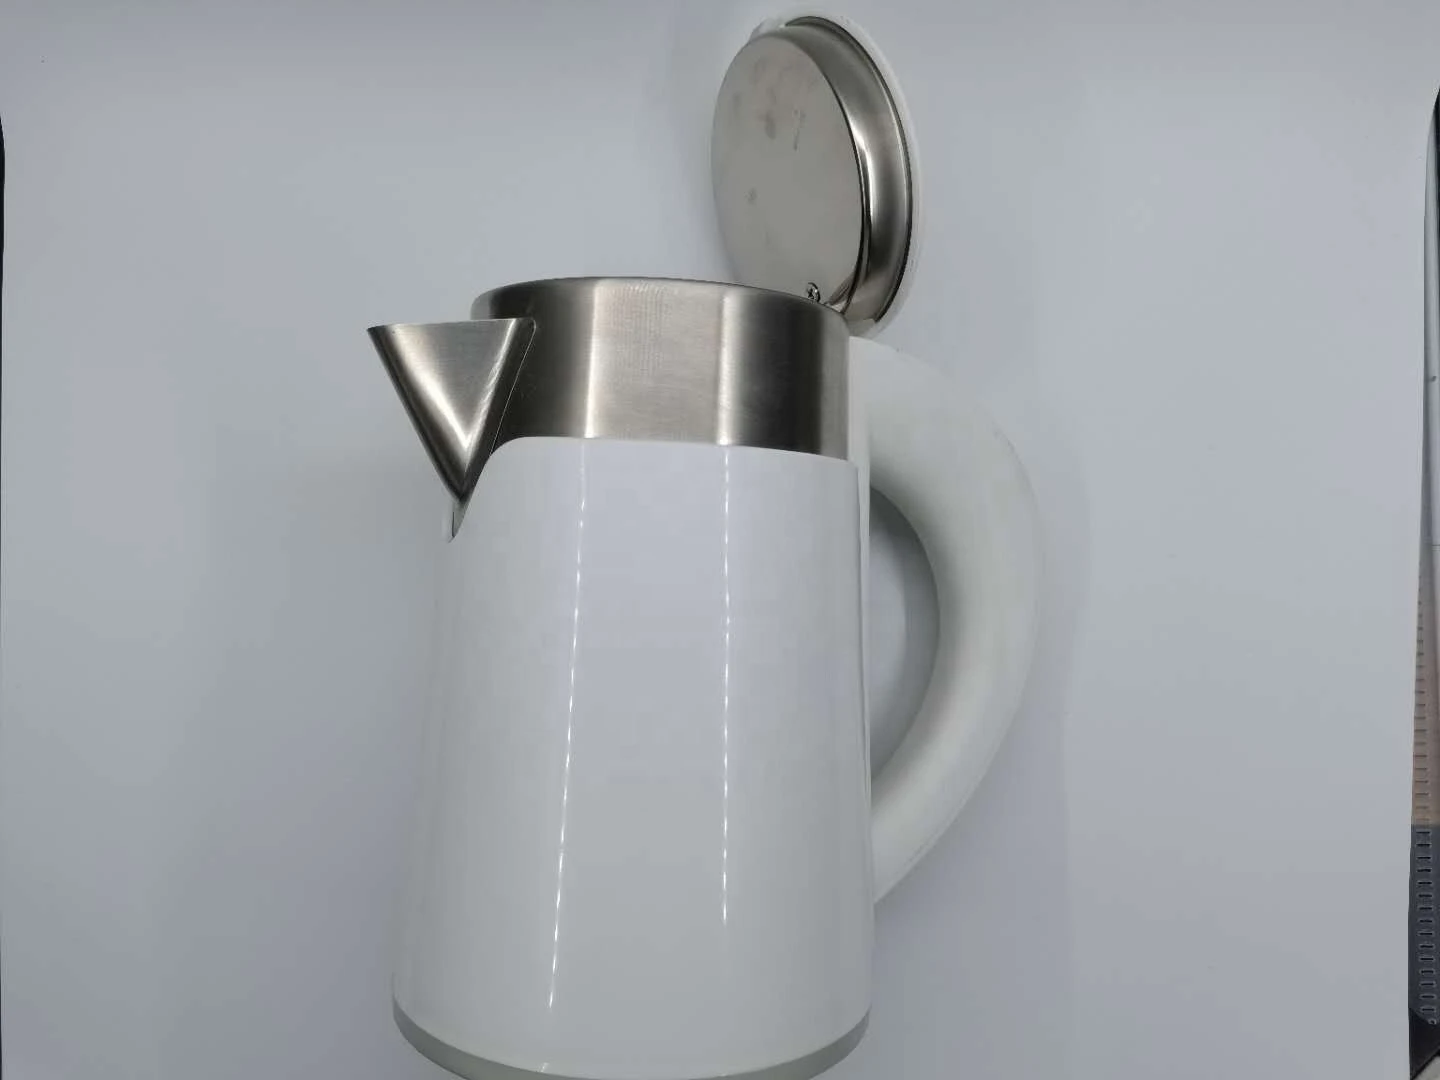 600ml automatic electric kettle